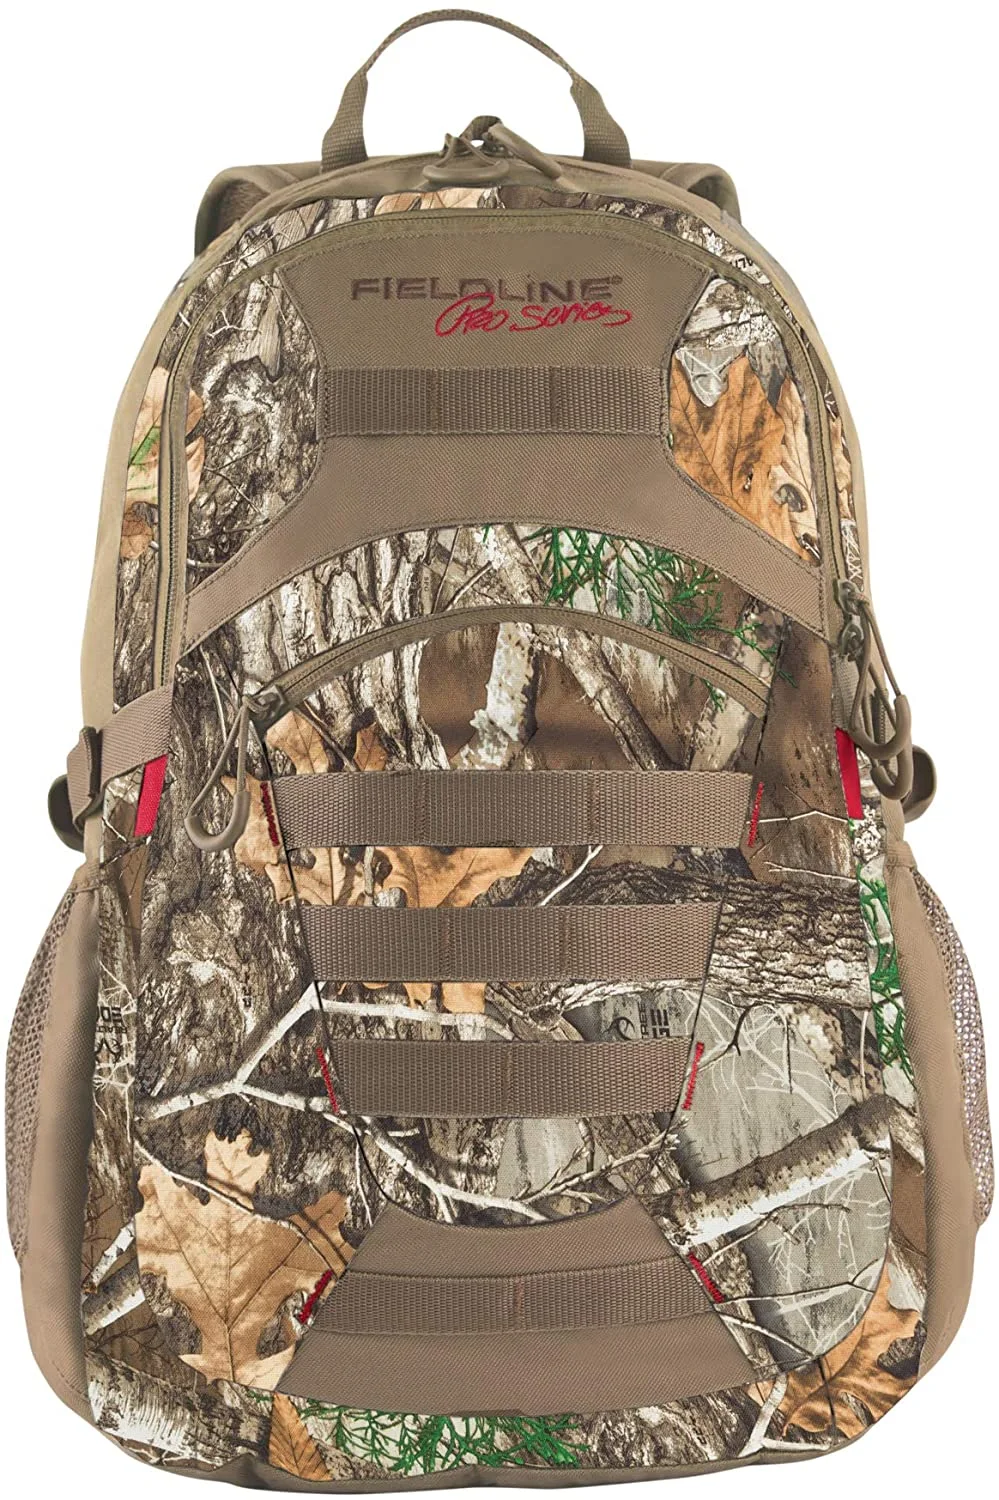 Outdoor Travel Hunting Backpack Daypack